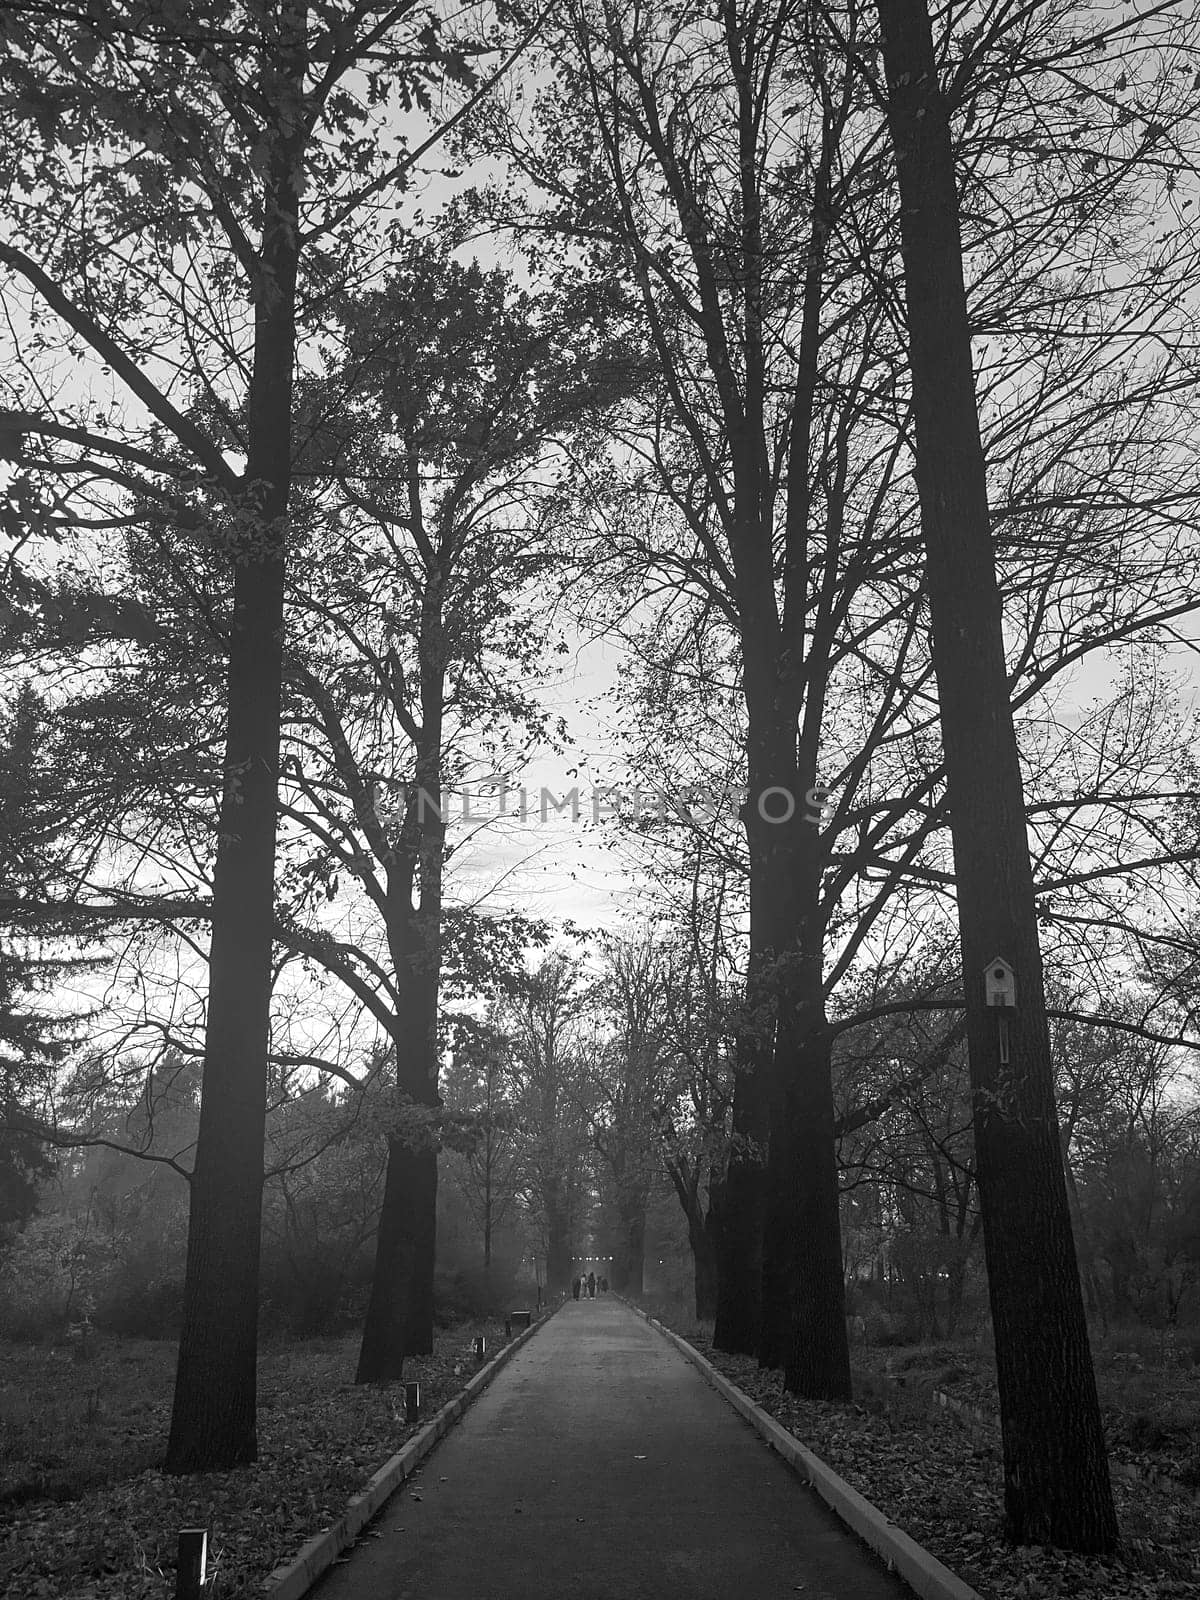 a beautiful walking alley with trees. black and white photo.